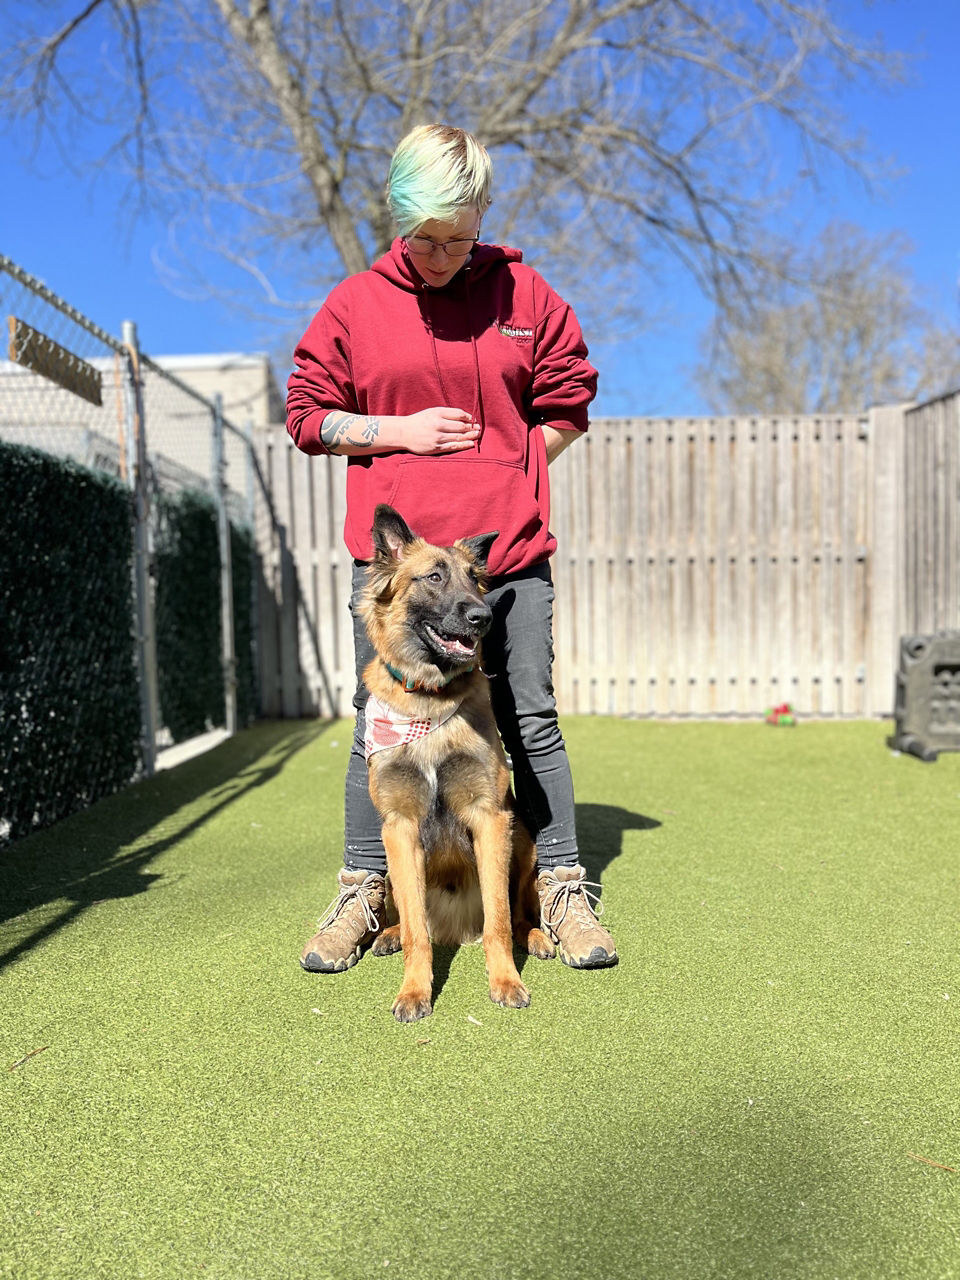 Dog with trainer